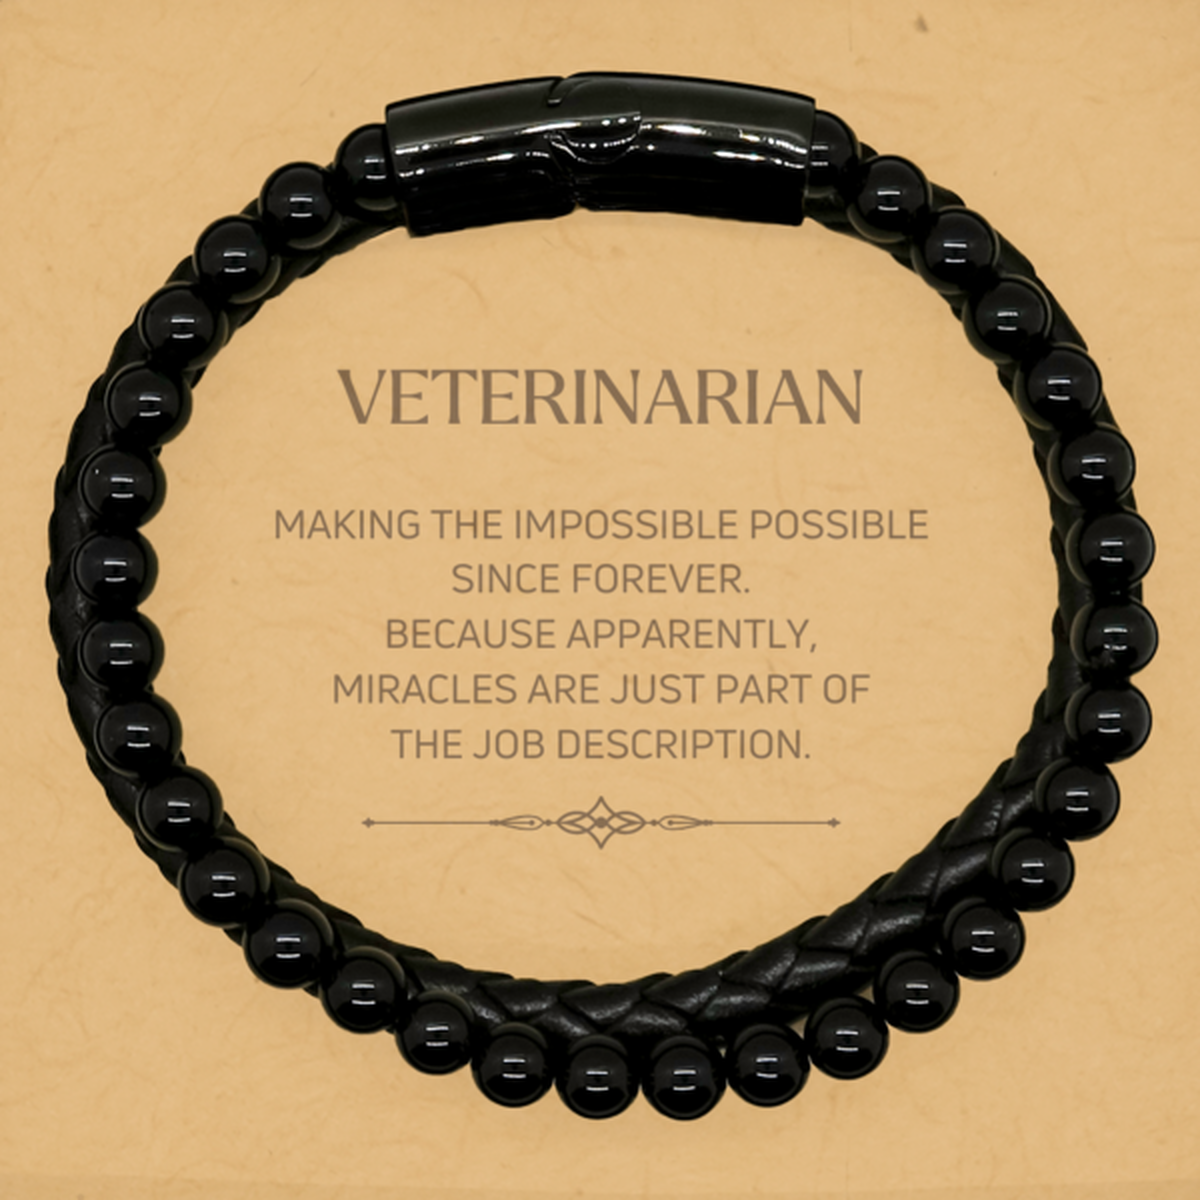 Funny Veterinarian Gifts, Miracles are just part of the job description, Inspirational Birthday Stone Leather Bracelets For Veterinarian, Men, Women, Coworkers, Friends, Boss